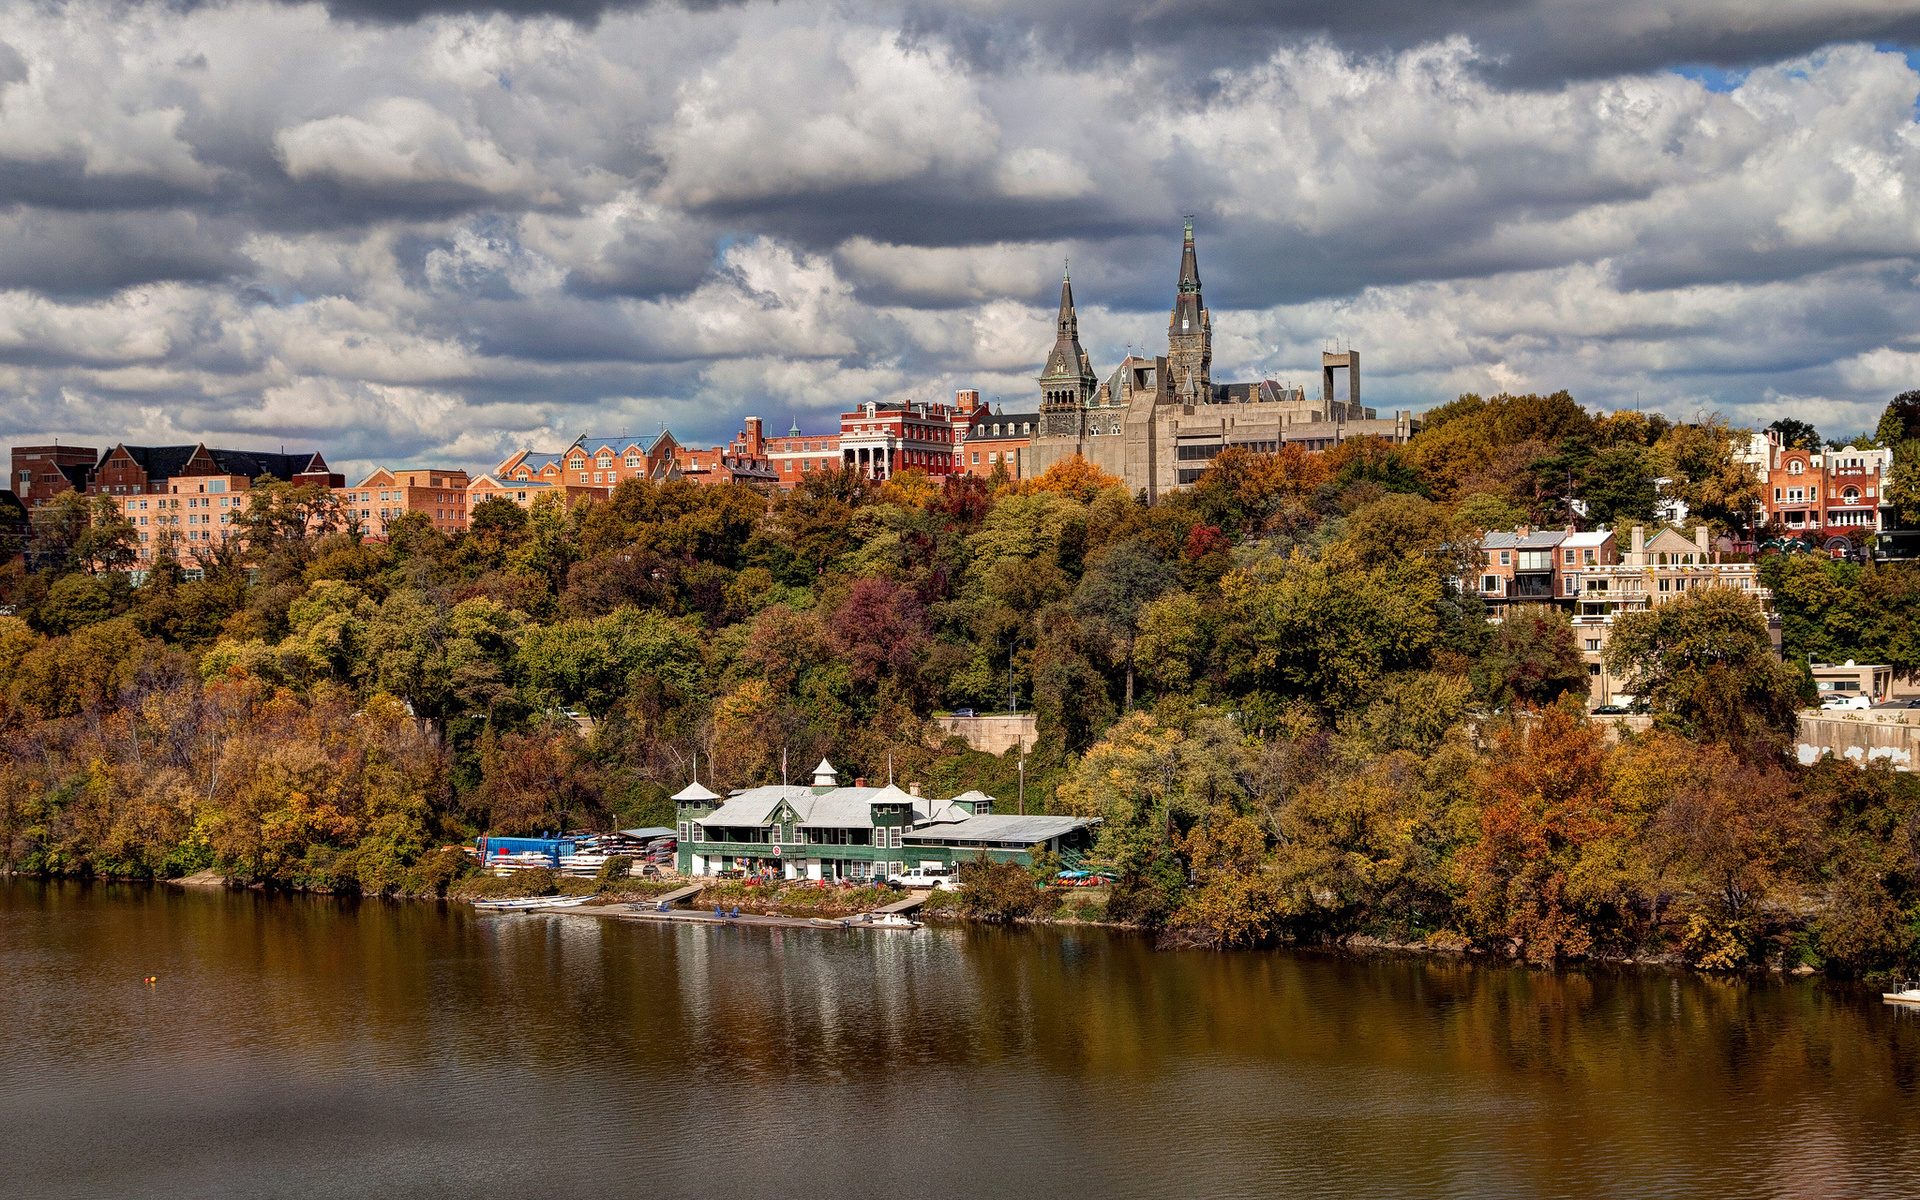 georgetown, University, School, College, World, Architecture, Buildings, Tower, Spire, Trees, River, Lake, Shore, Autumn, Fall, Seasons, Sky, Clouds, Leaves, Scenic Wallpaper